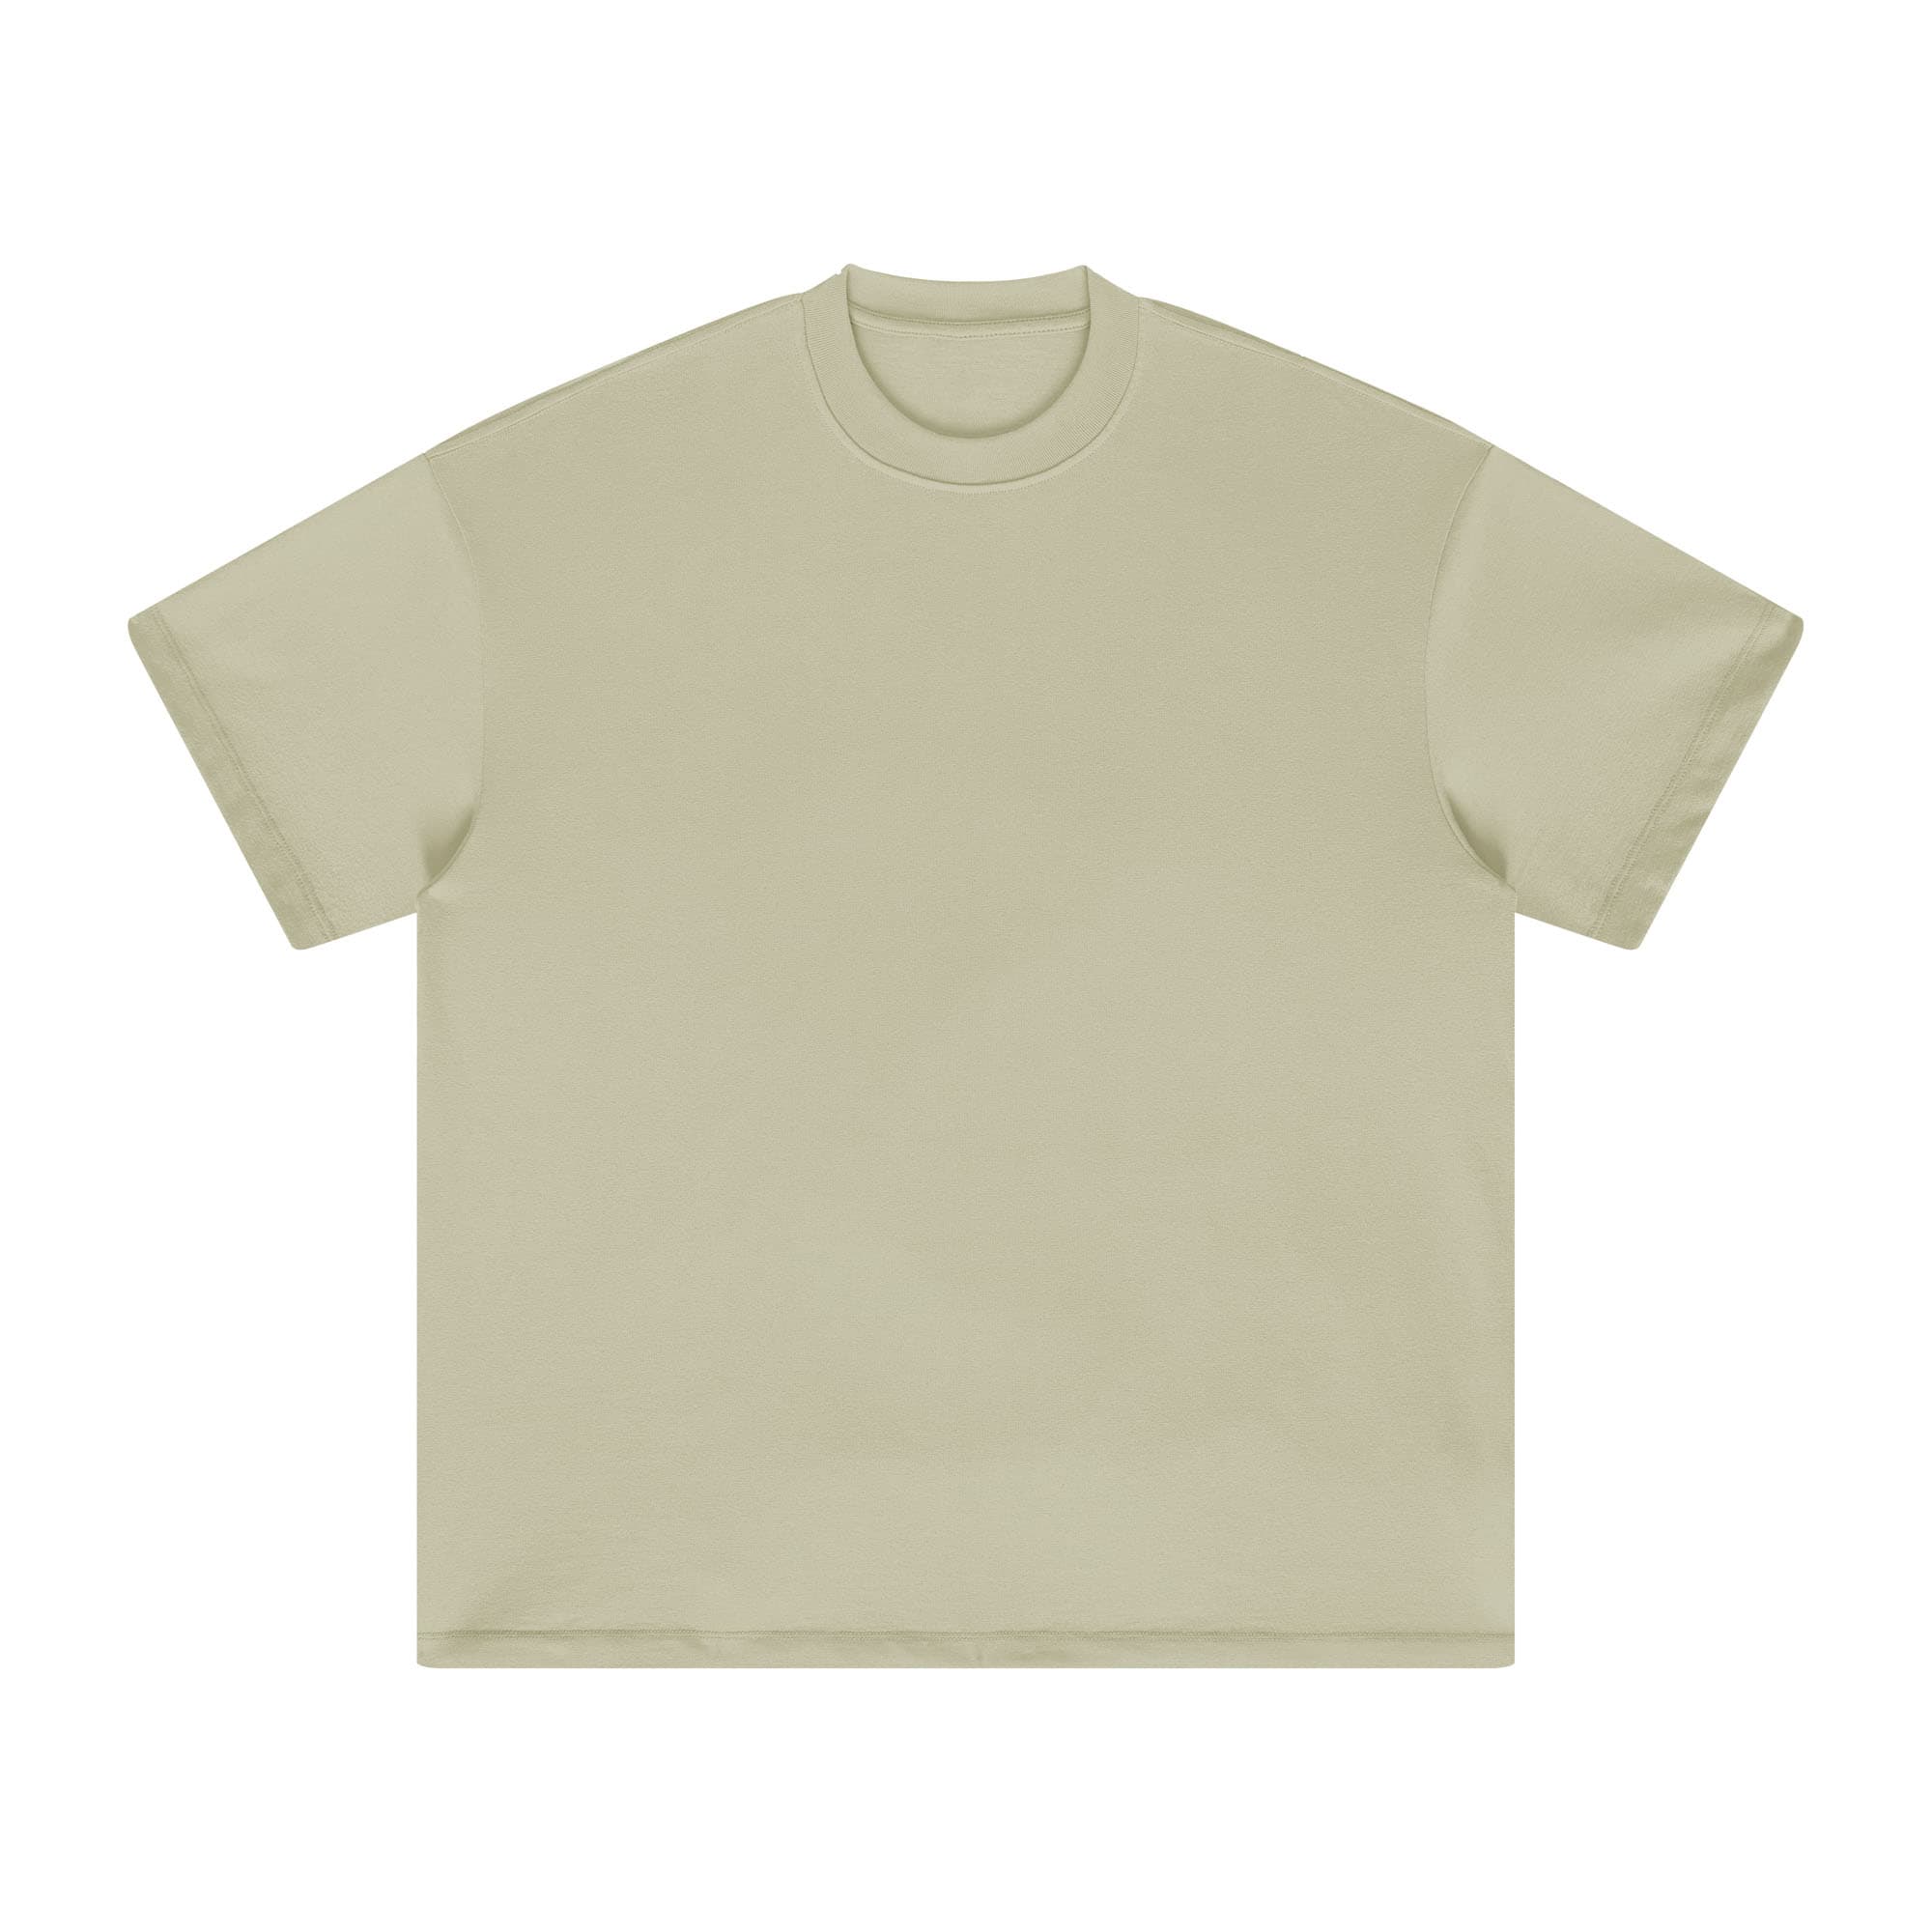 Oversized Tee 305GSM-gray apricot